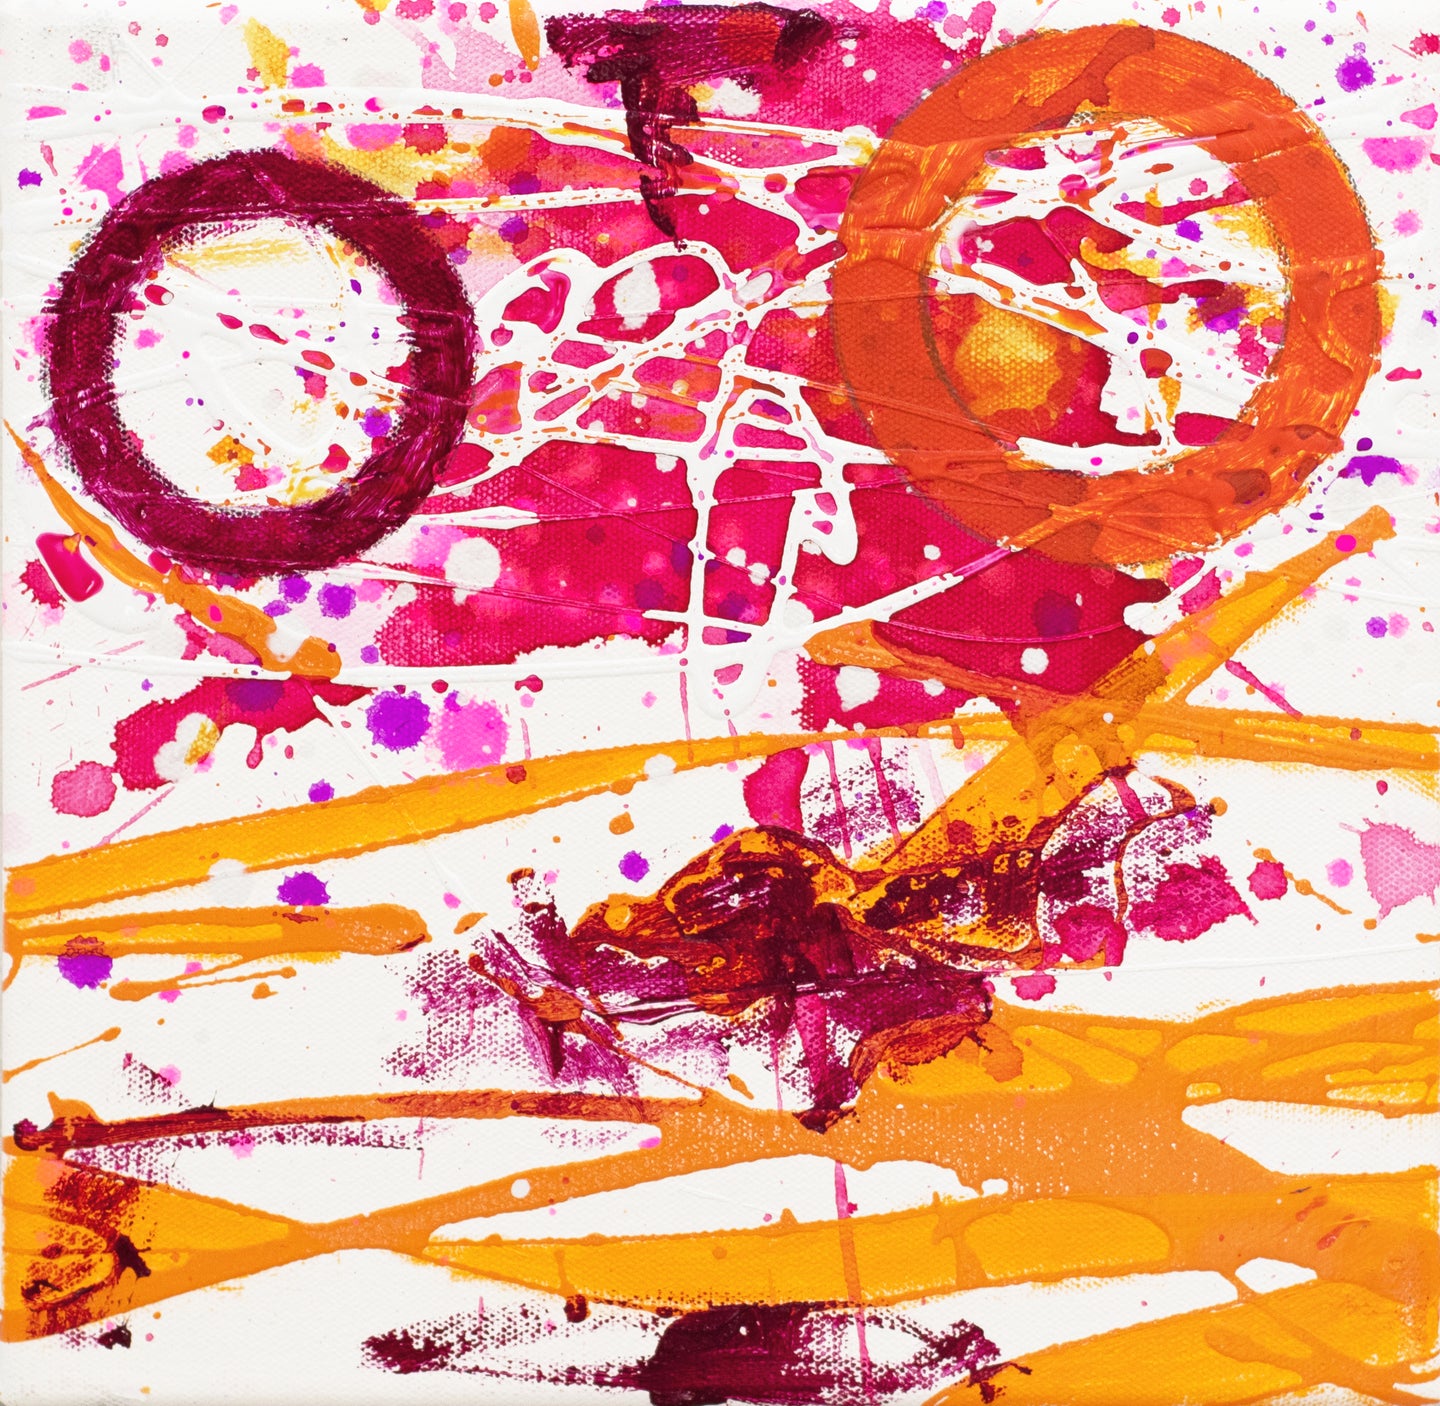 J. Steven Manolis, Flamingo 10.10.04, 2020, acrylic and latex painting on canvas, 10 x 10 inches, Flamingo Art, Abstract expressionism art for sale at Manolis Projects Art Gallery, Miami, Fl